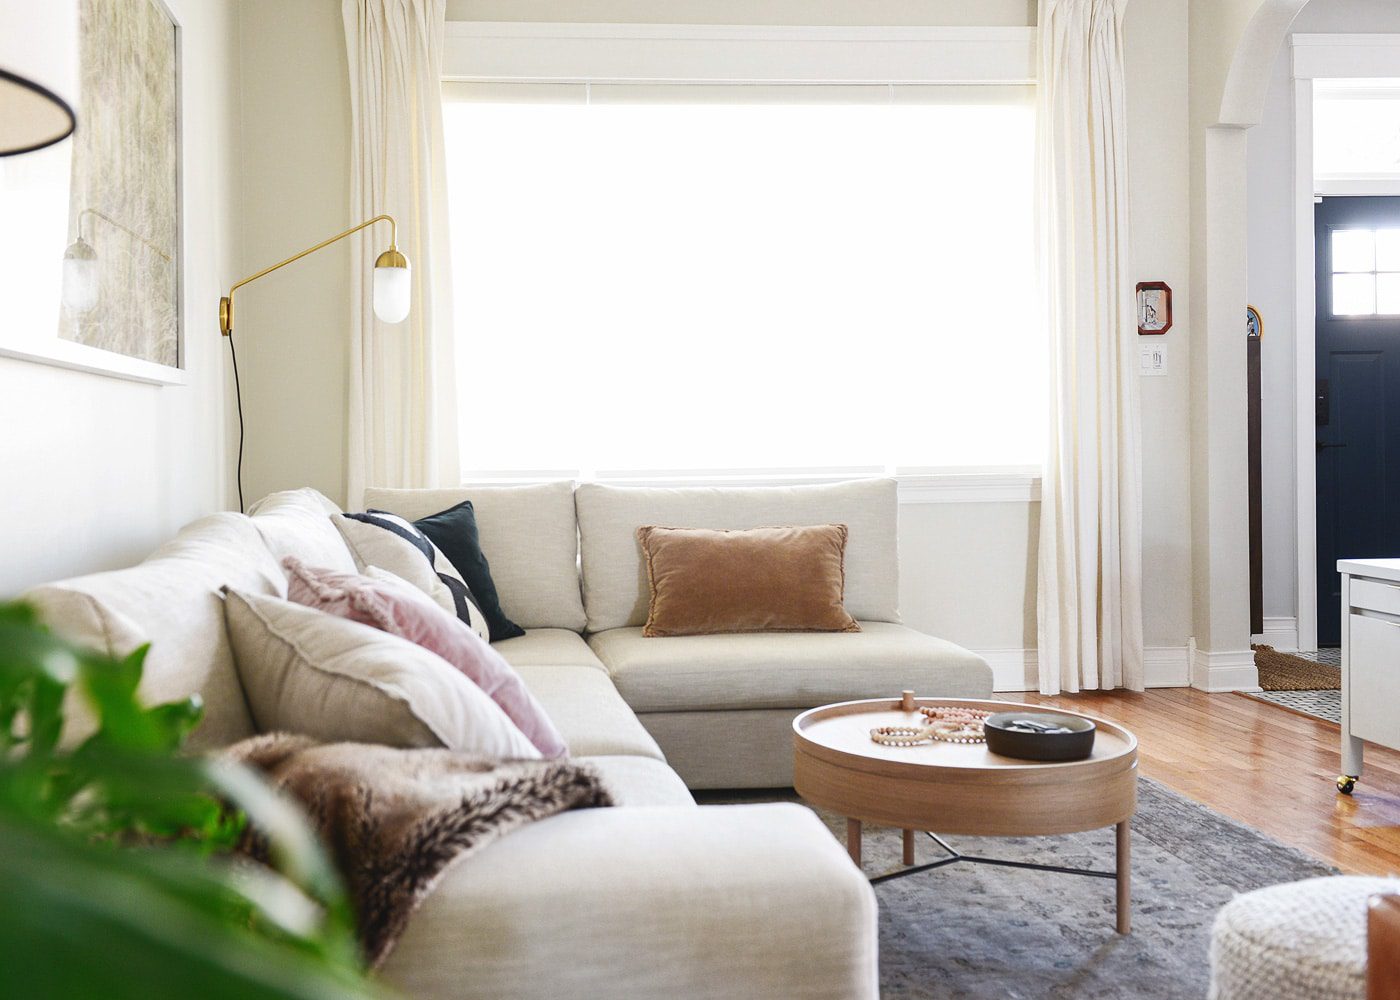 Article Gaba sectional in Pearl White, a living room makeover (or a makeunder?!) // neutral, cozy living room via Yellow Brick Home